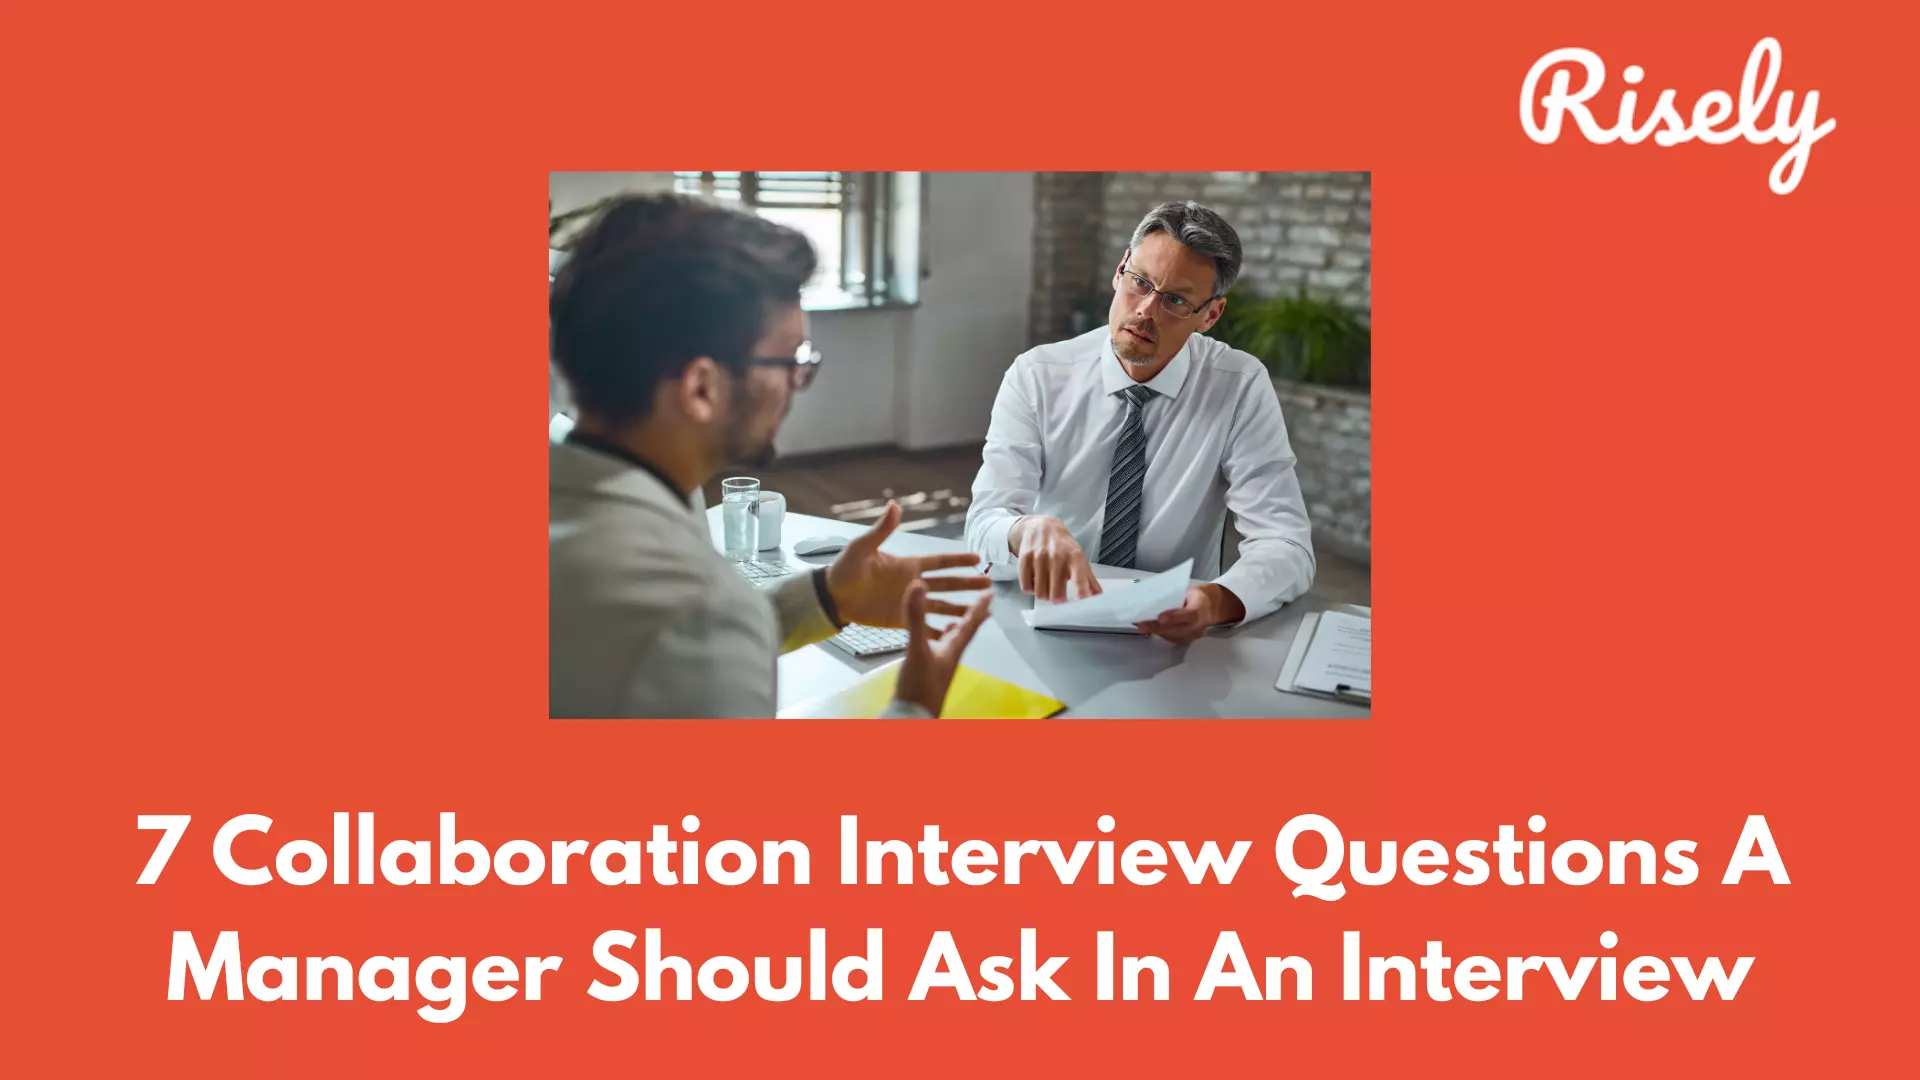 7 Collaboration Interview Questions A Manager Should Ask In An Interview